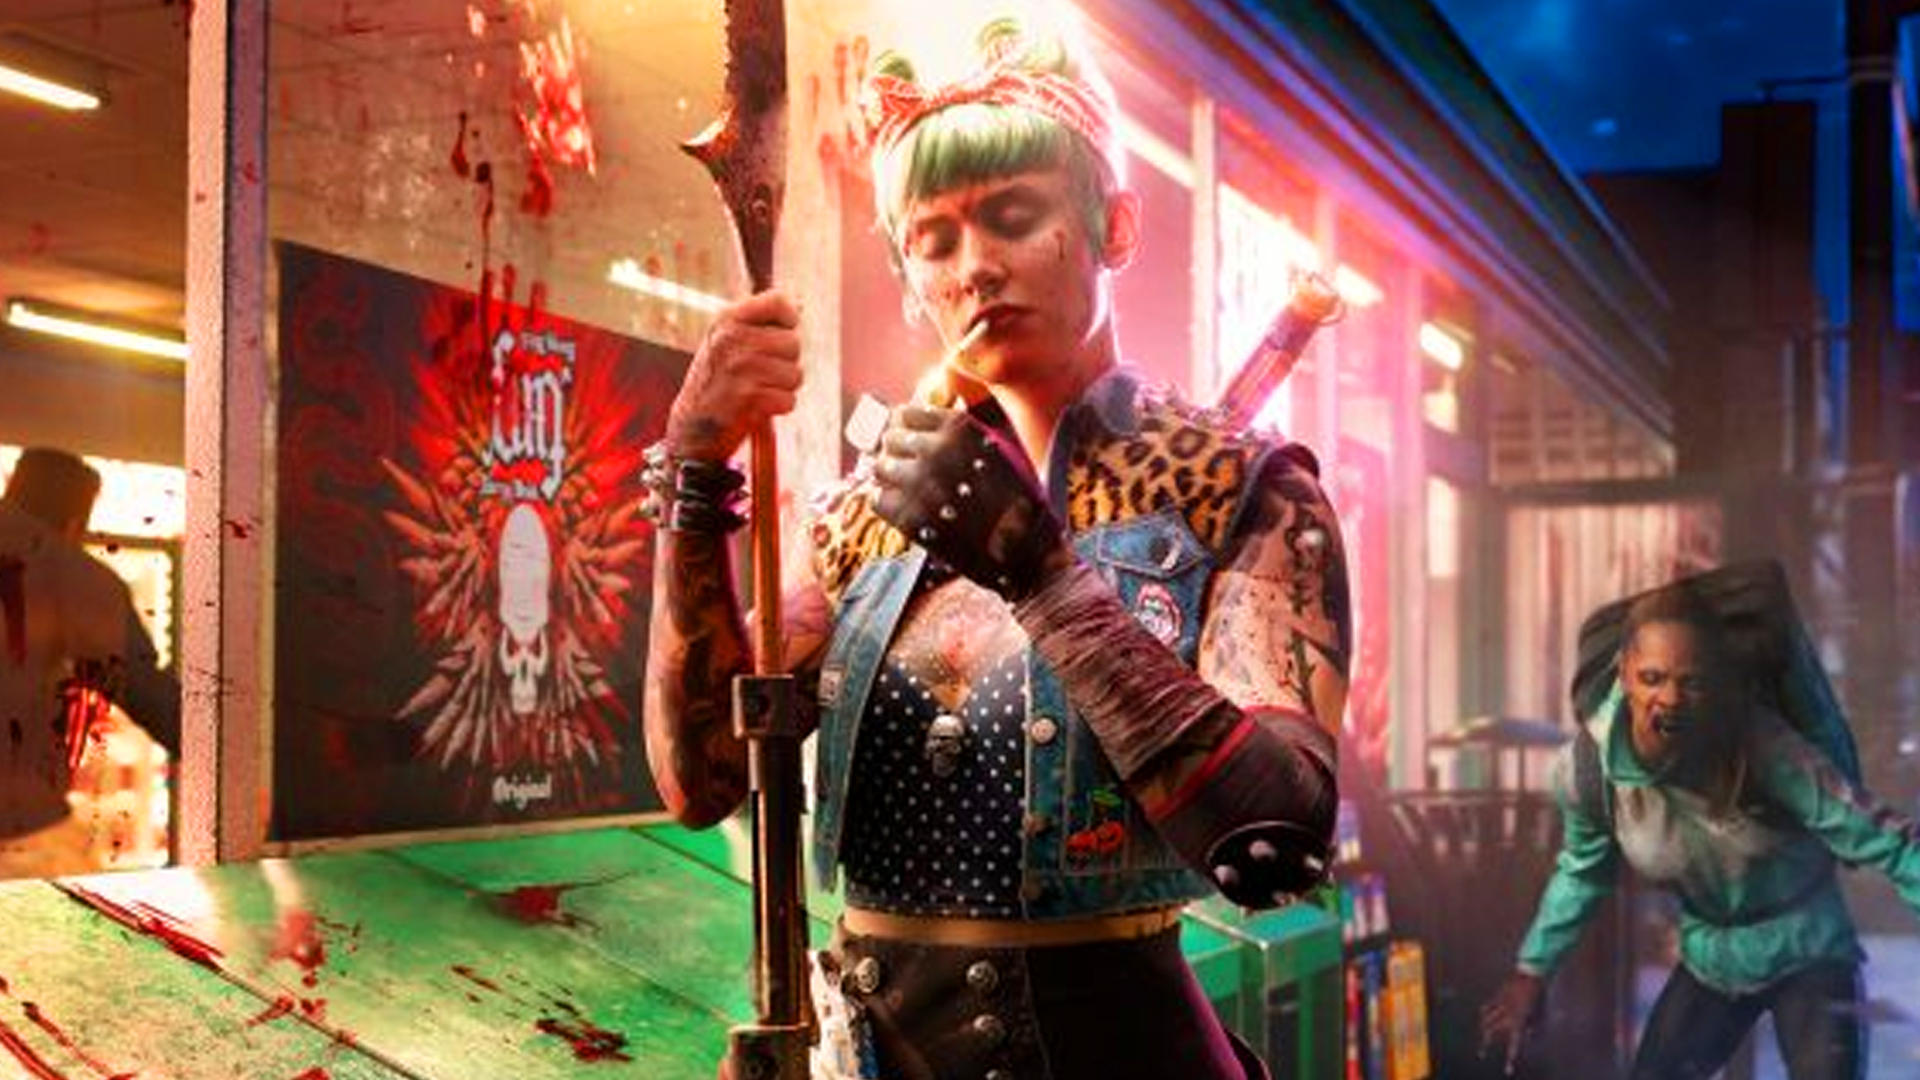 Slay in Style with Dead Island 2 'From Dusk' Collection Skins and Weapons –  available through  Prime Gaming